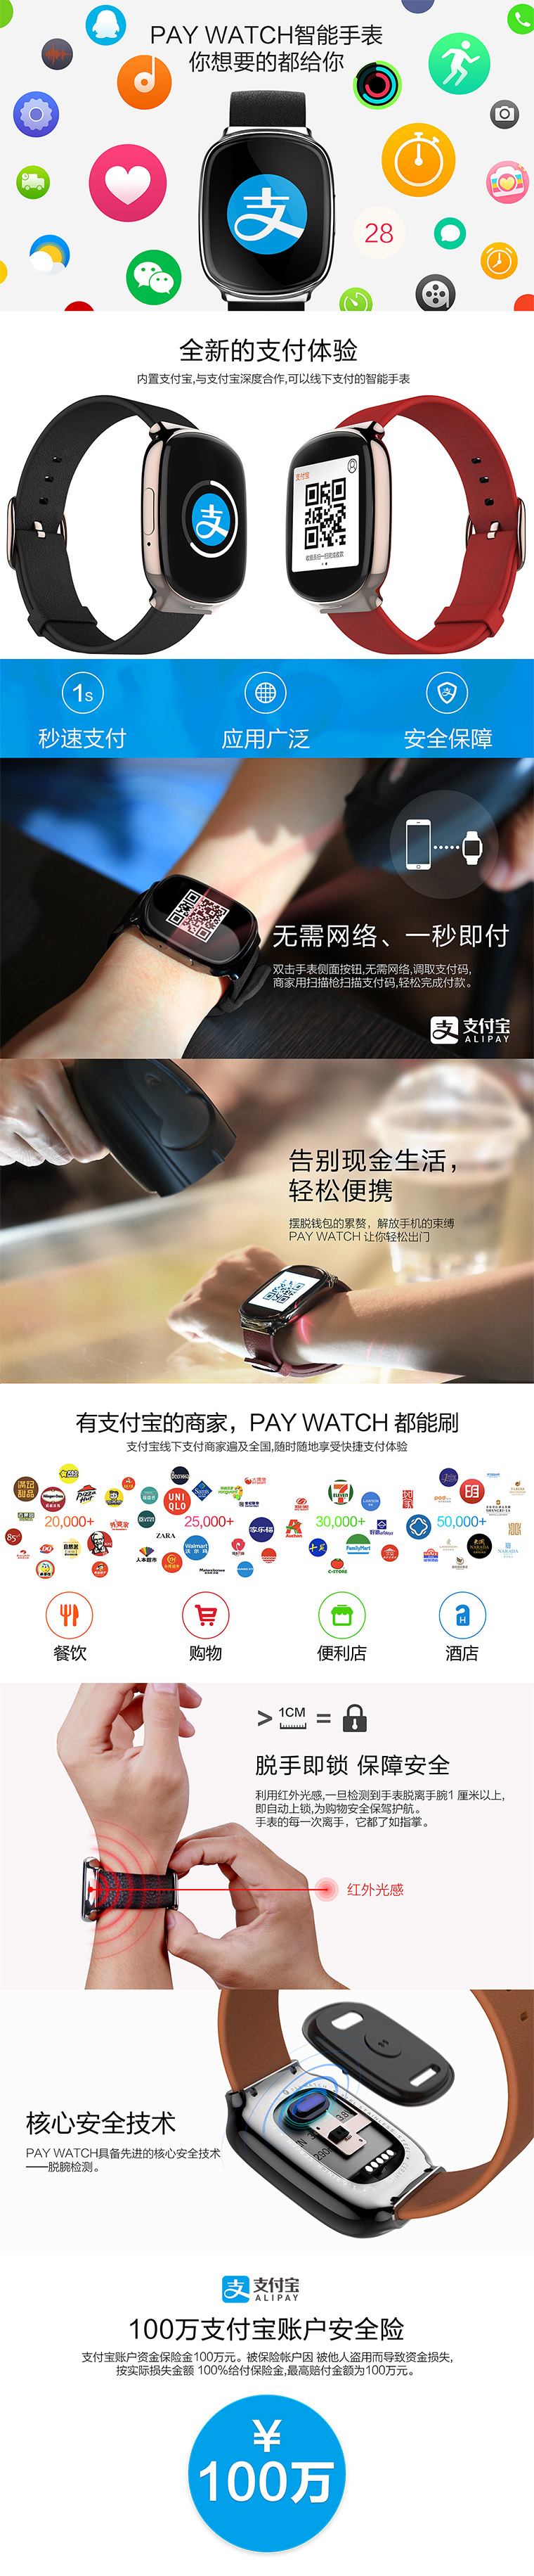 alibaba-pay-watch